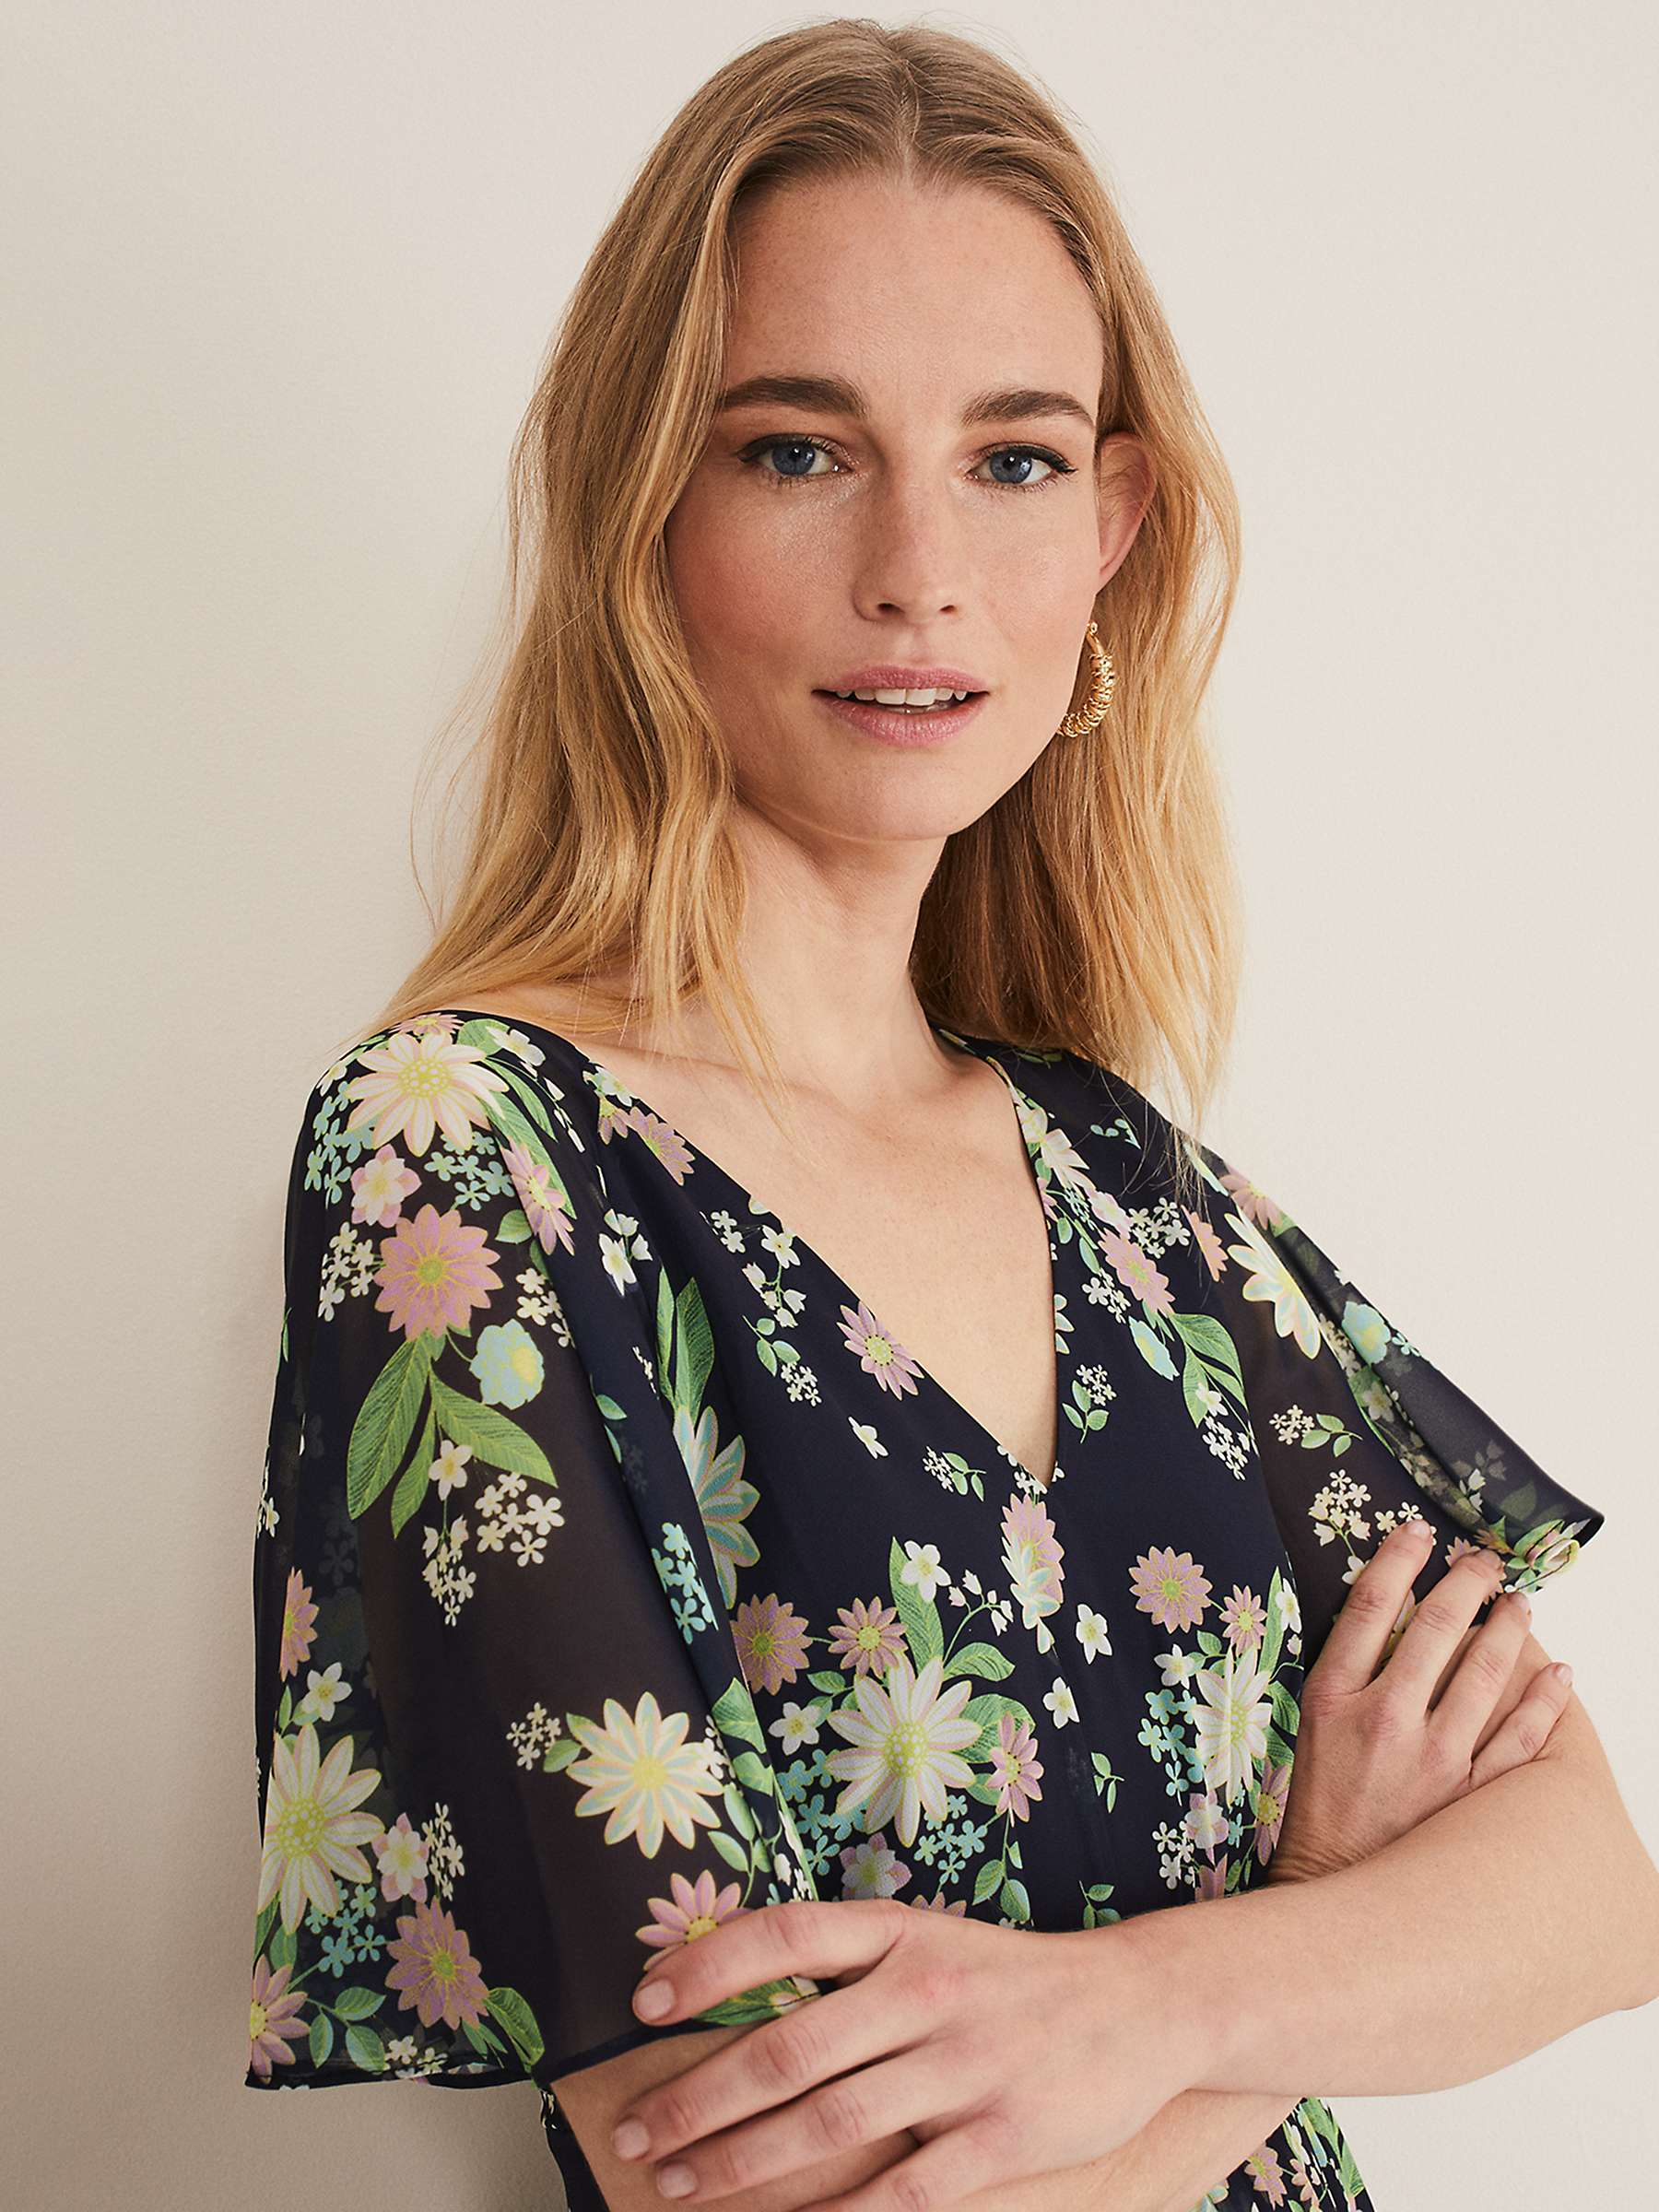 Buy Phase Eight Georgie Tiered Floral Maxi Dress, Navy/Multi Online at johnlewis.com